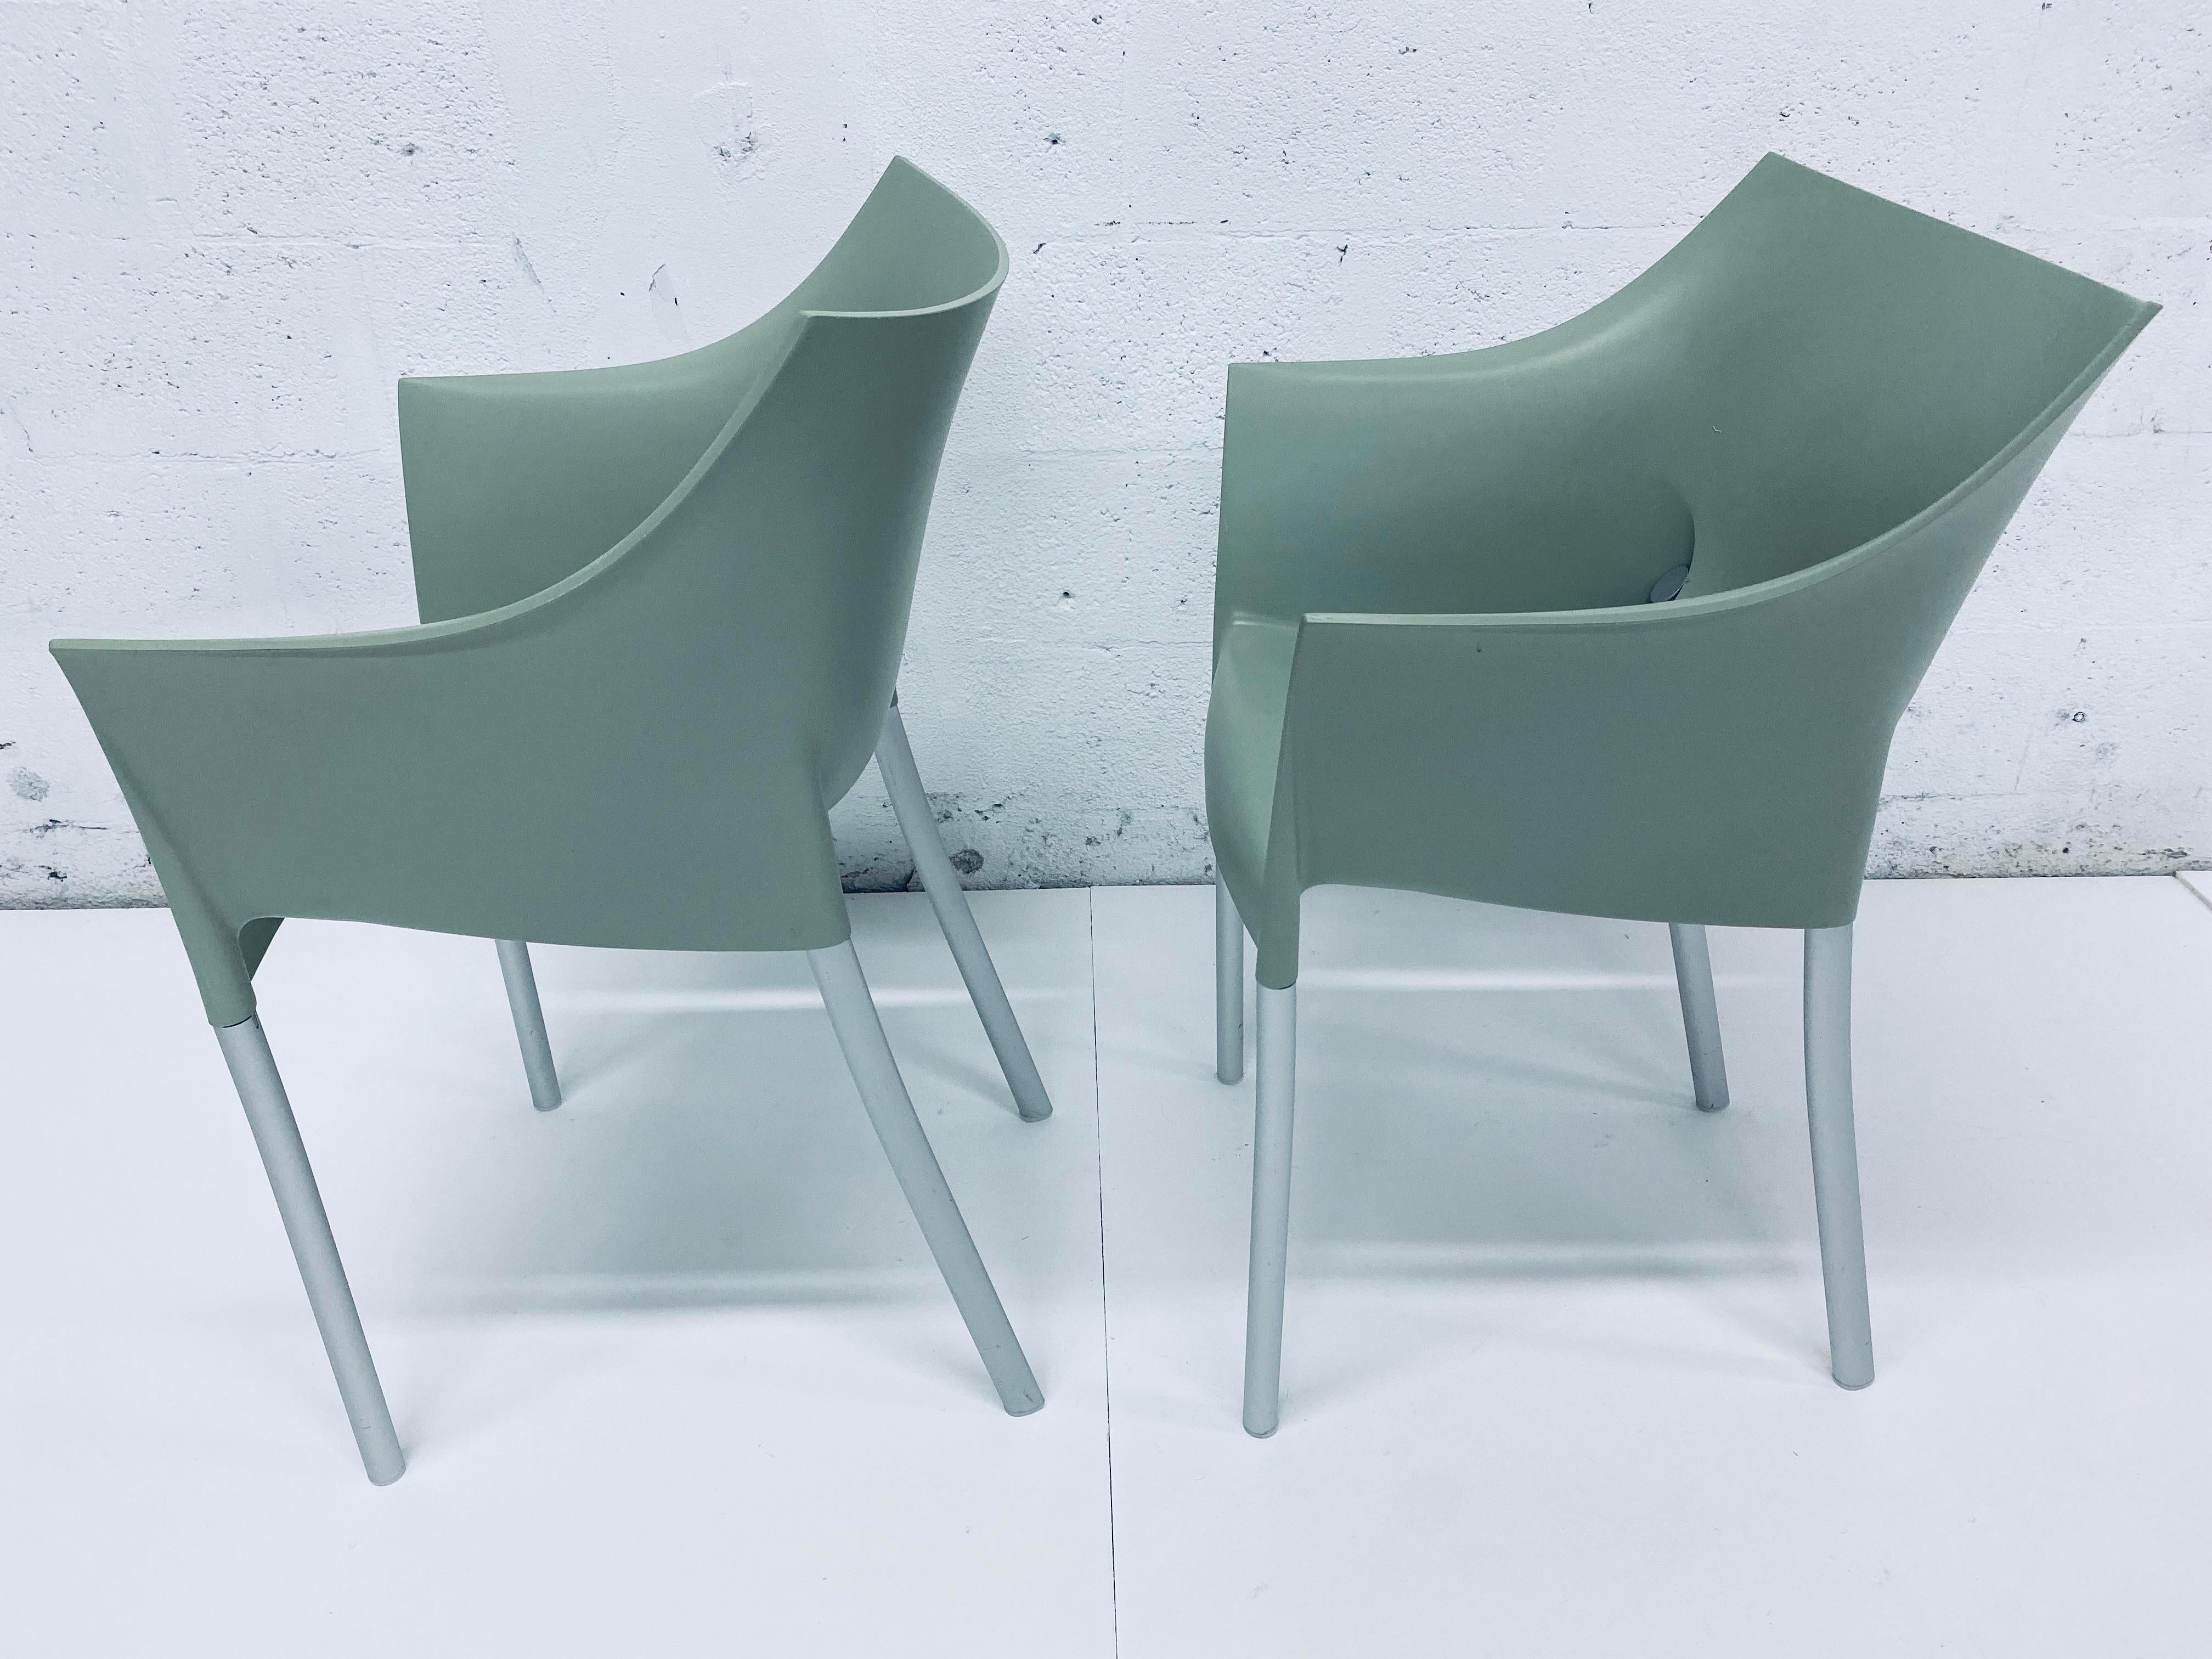 Plastic Pair of Philipp Starck “Dr. No” Chairs for Kartell